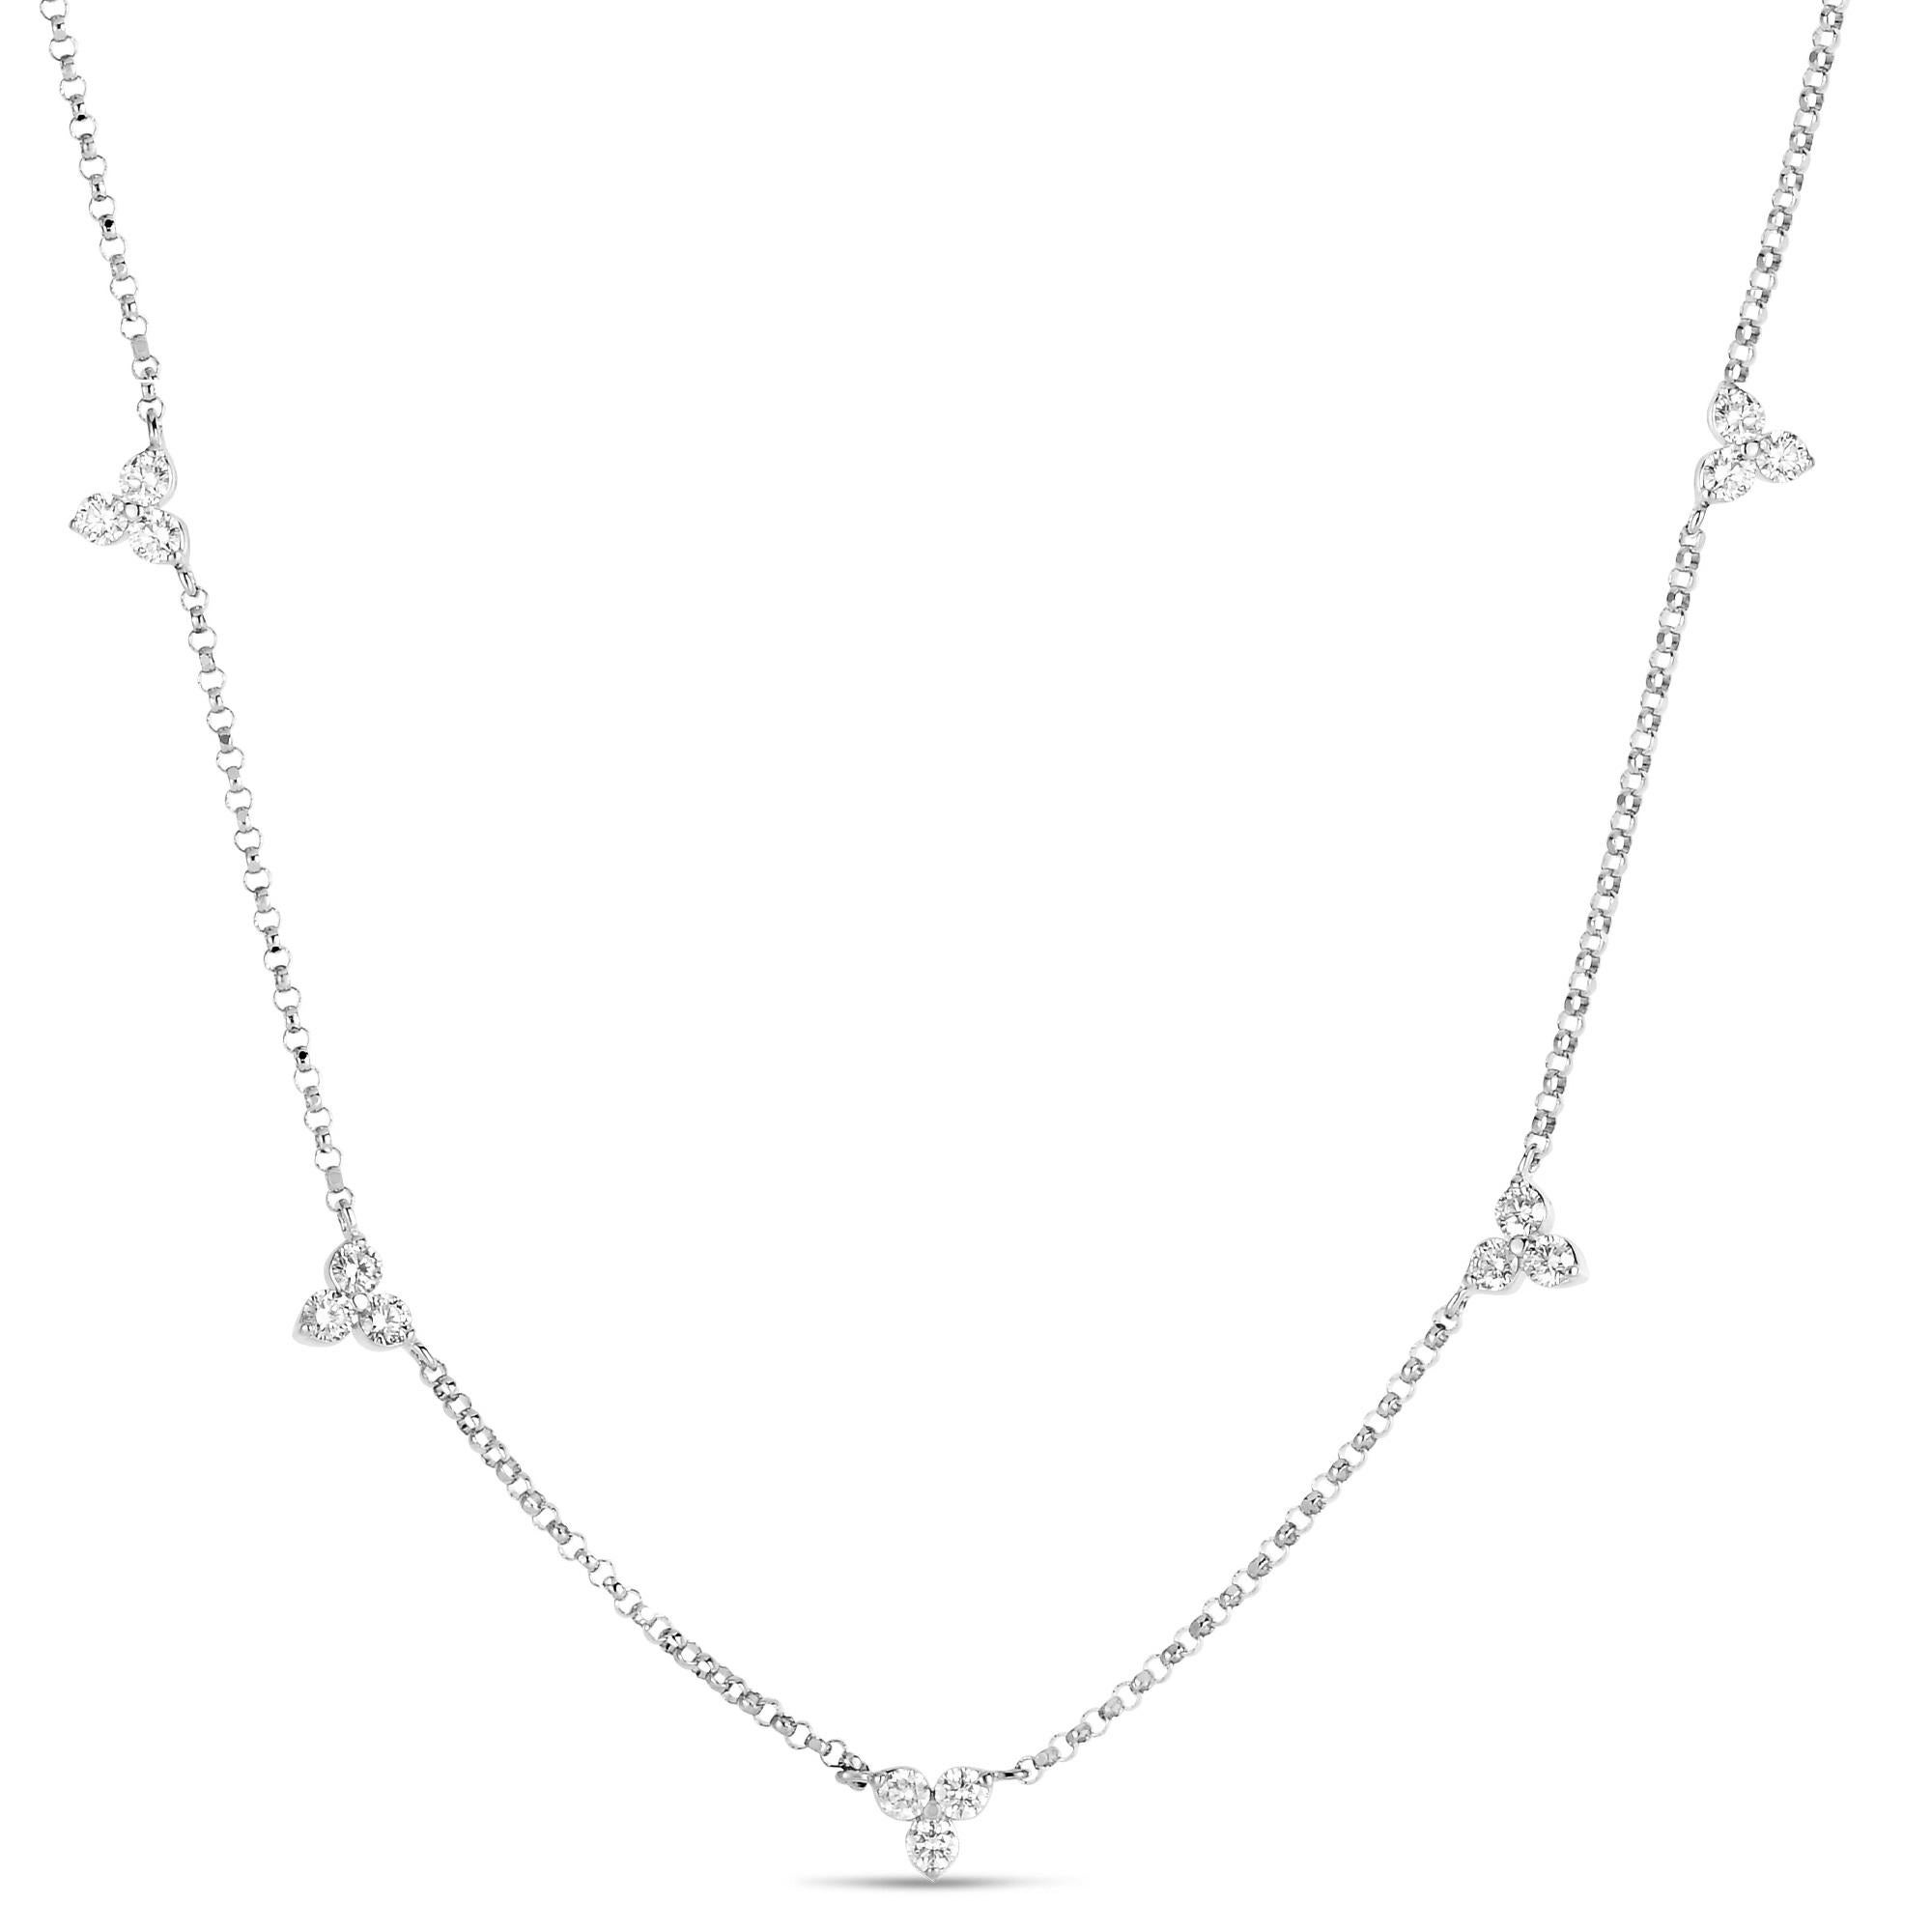 18k white gold necklace